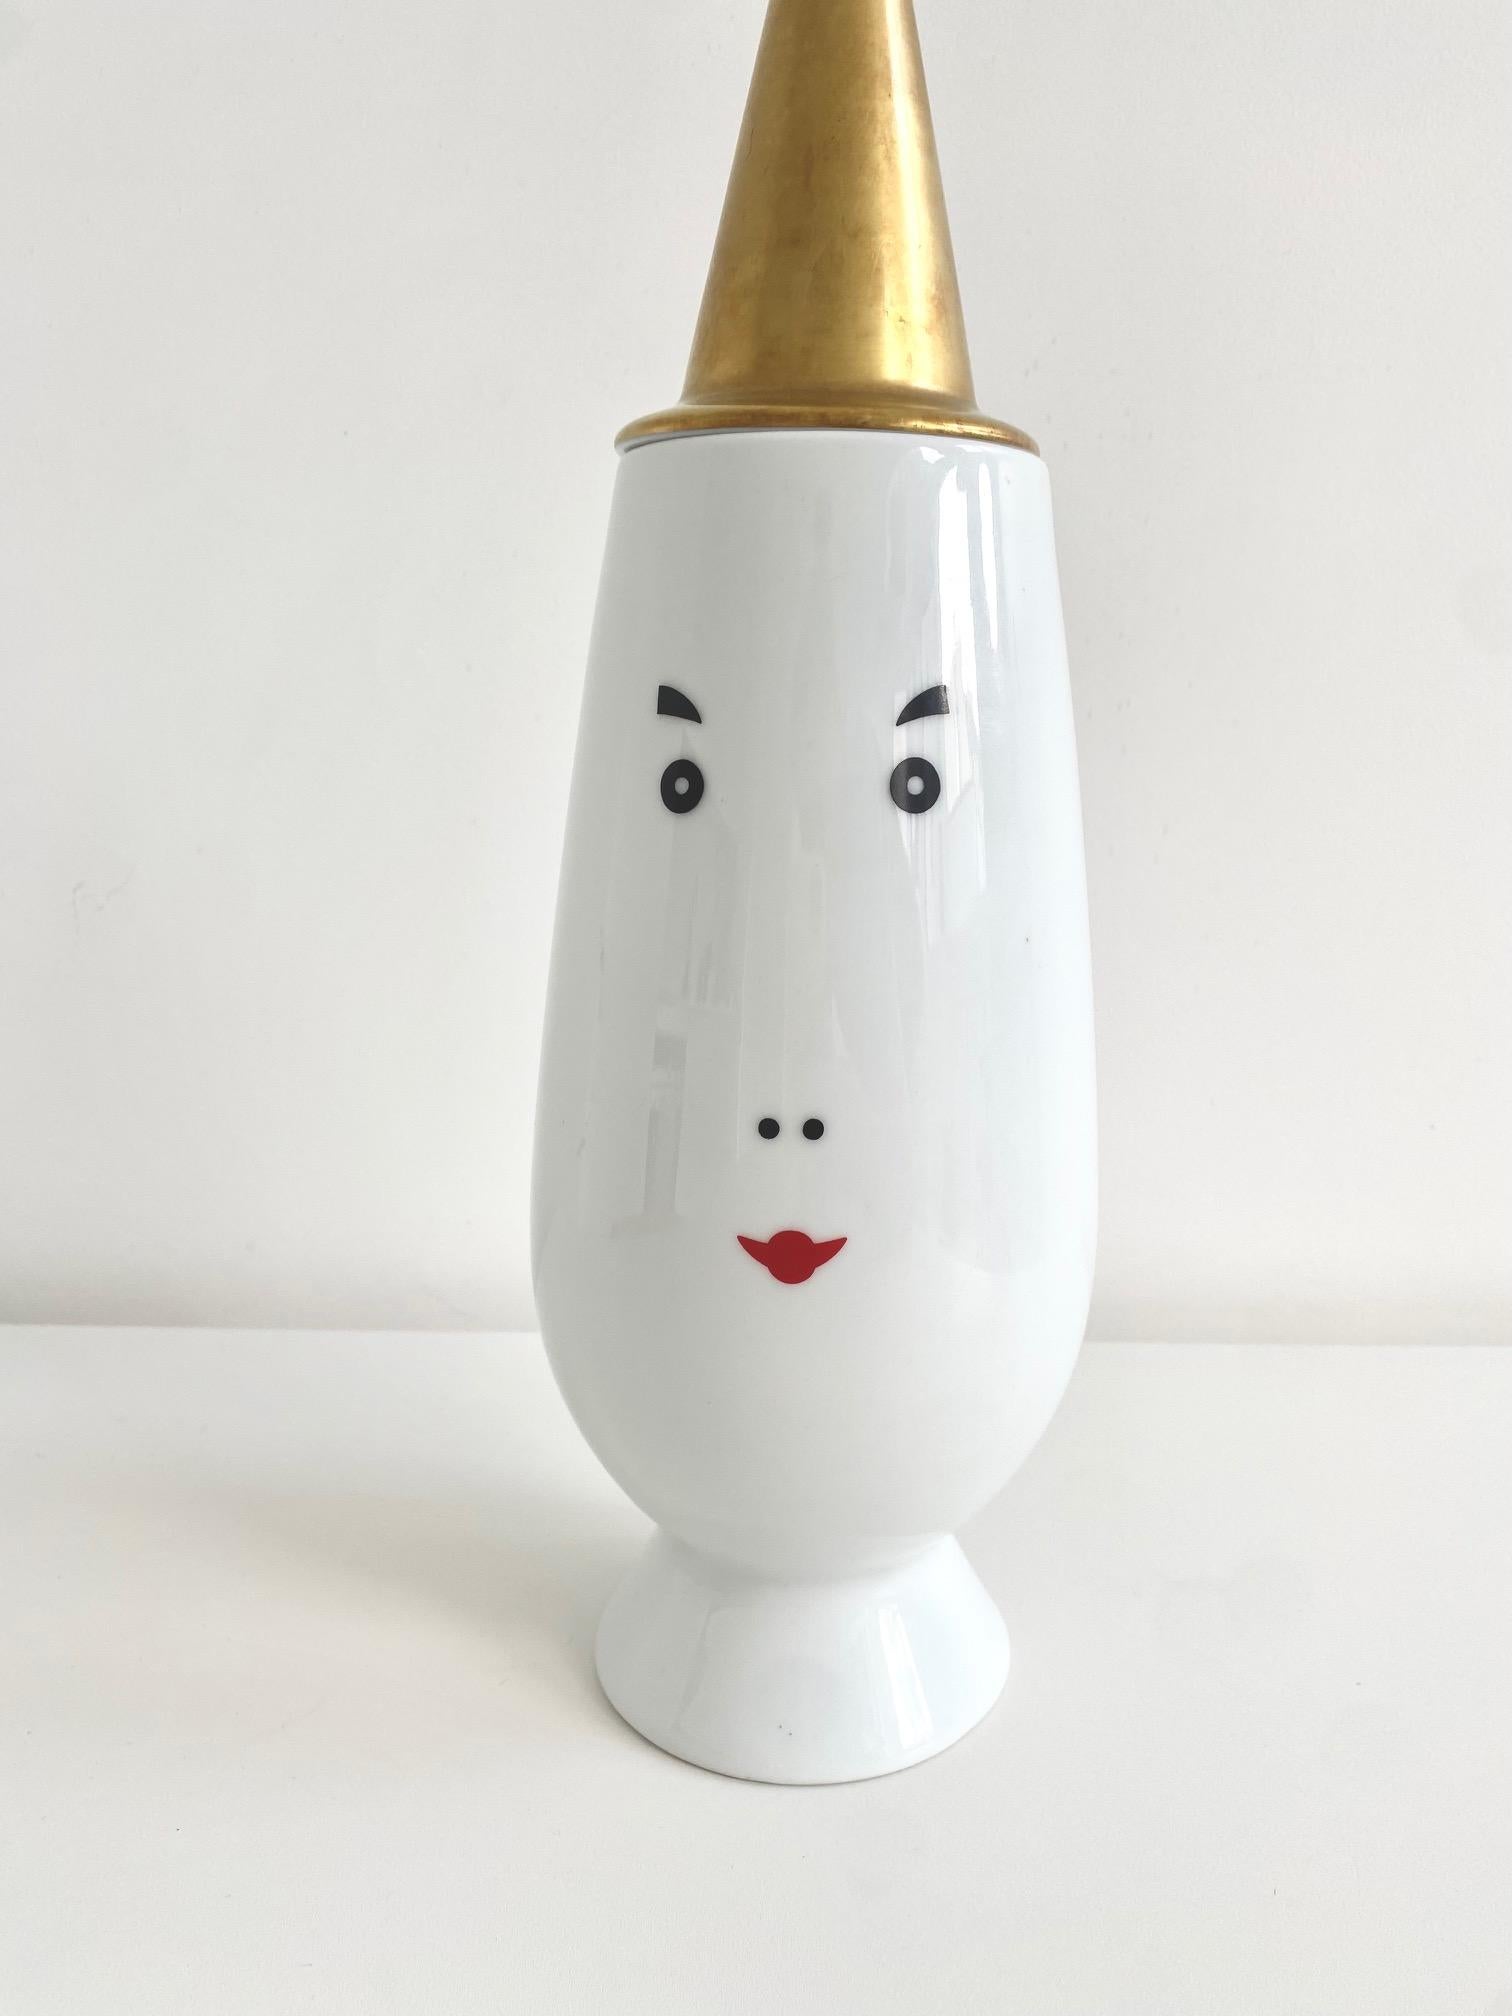 Alessandro Mendini, Mara Voce, Alessi Tendentse, Vase, 100% Make-Up, 1992 In Excellent Condition For Sale In PARIS, FR